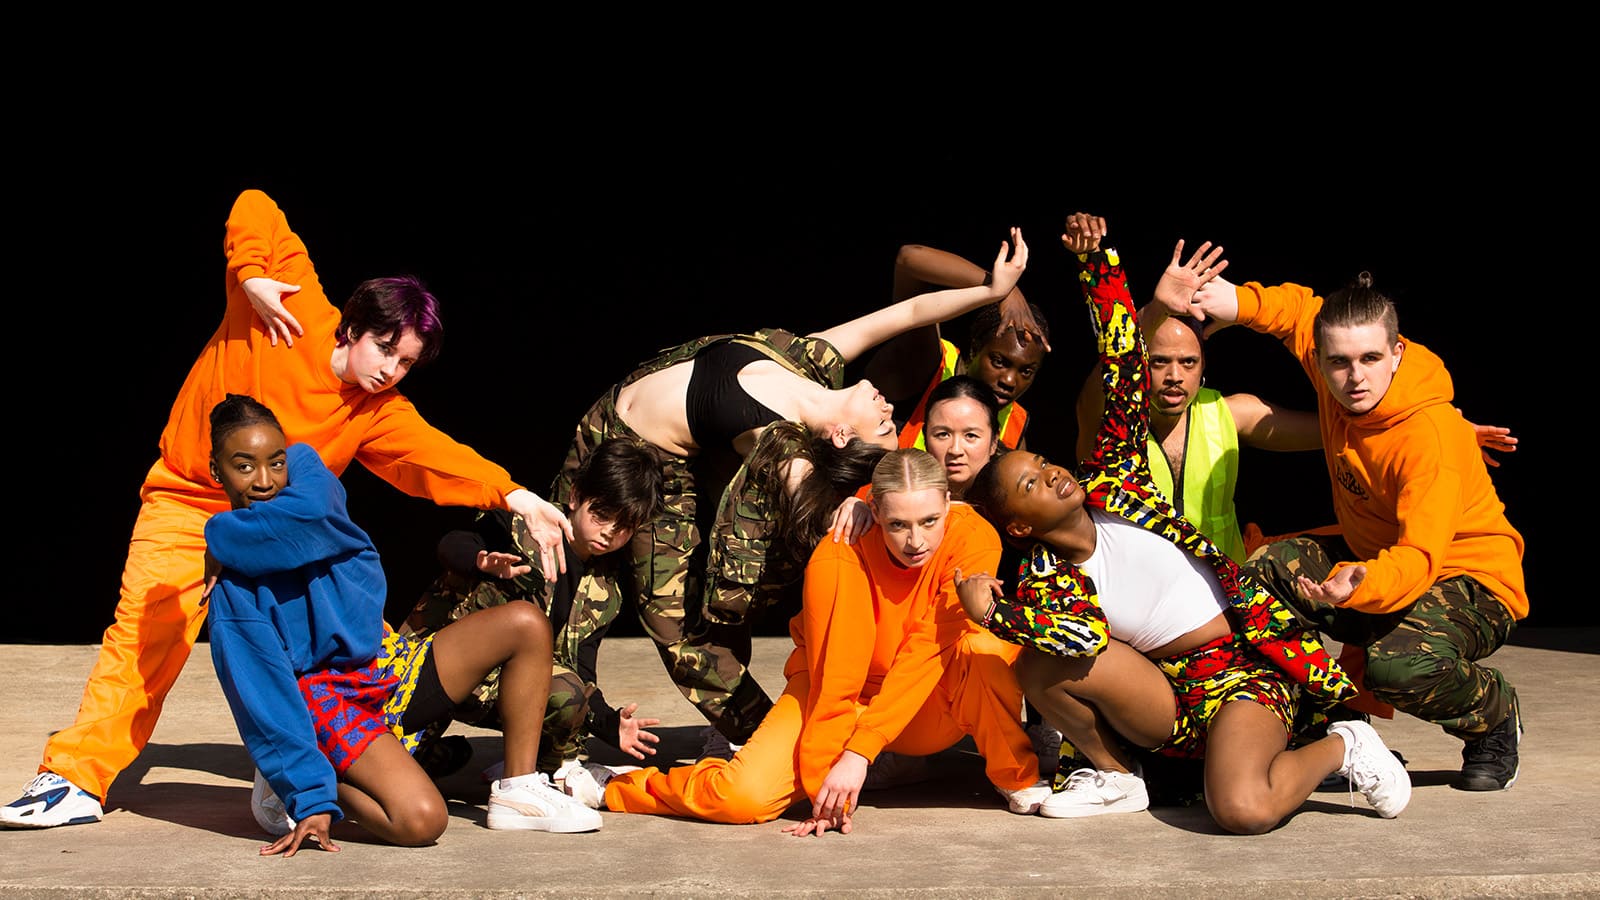 A group of dancers pose on a stage, all dressed in camouflage, or bright orange, green and red